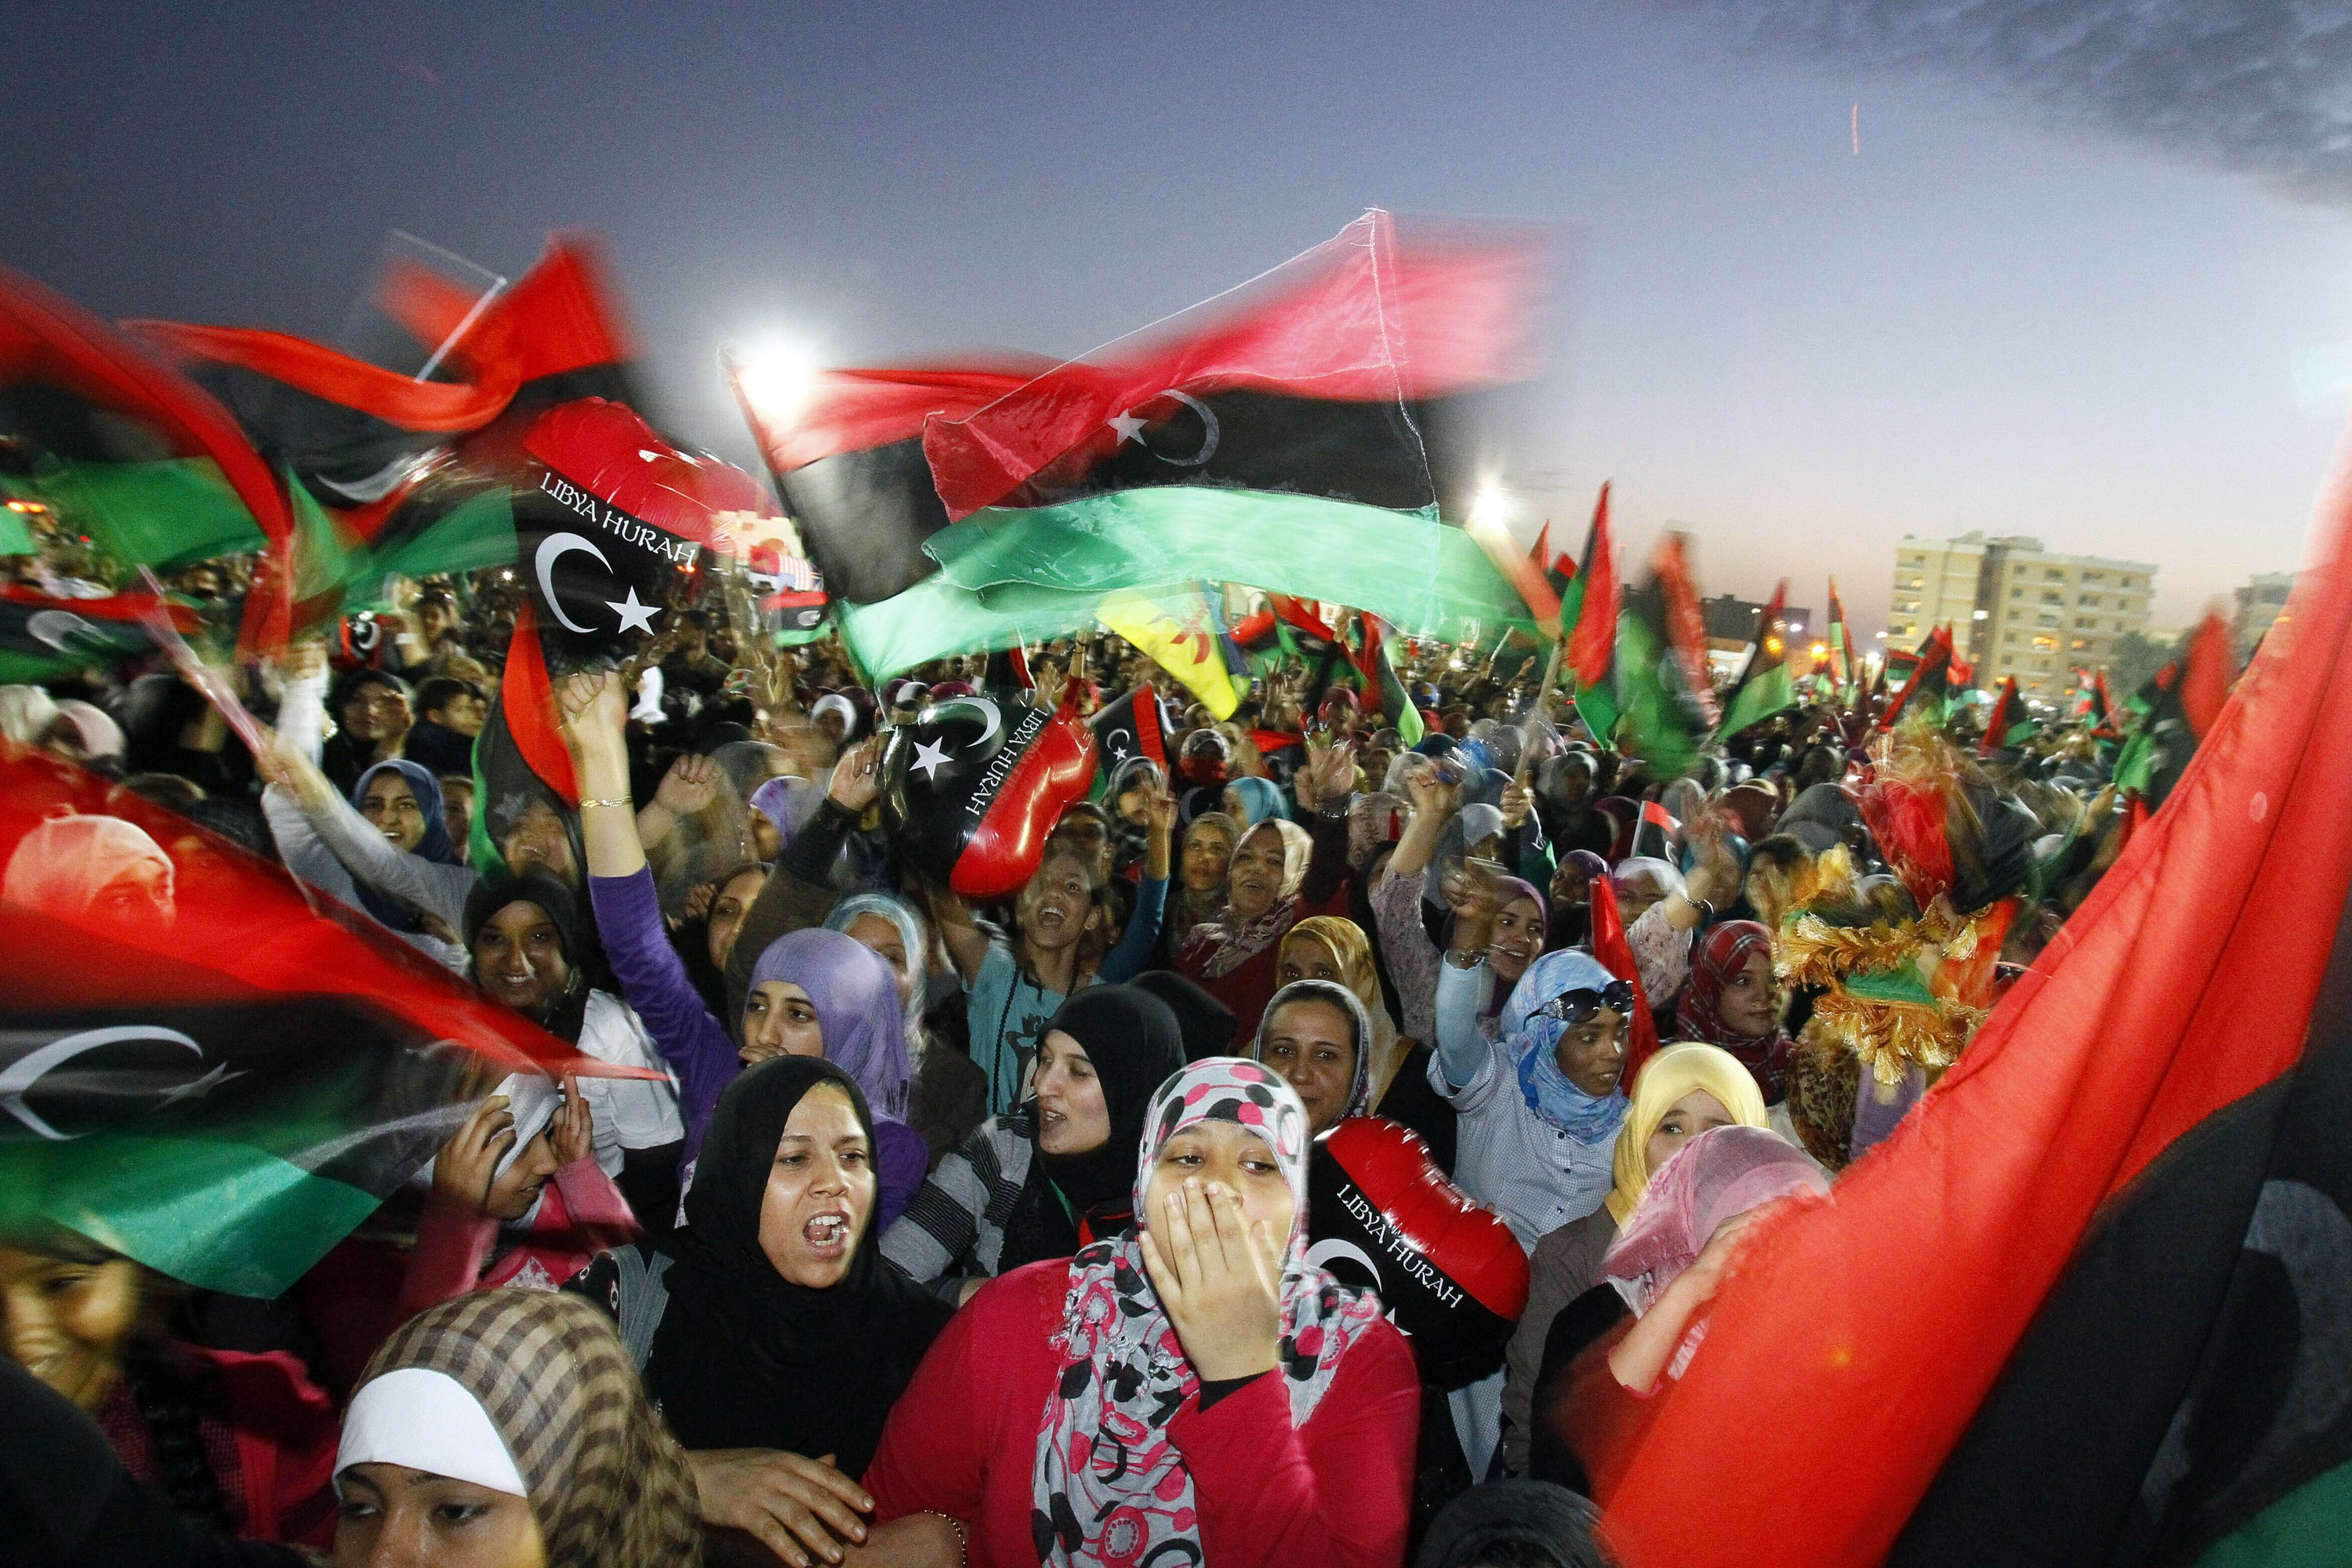 Libyans mark 2011 uprising with an eye on interim government